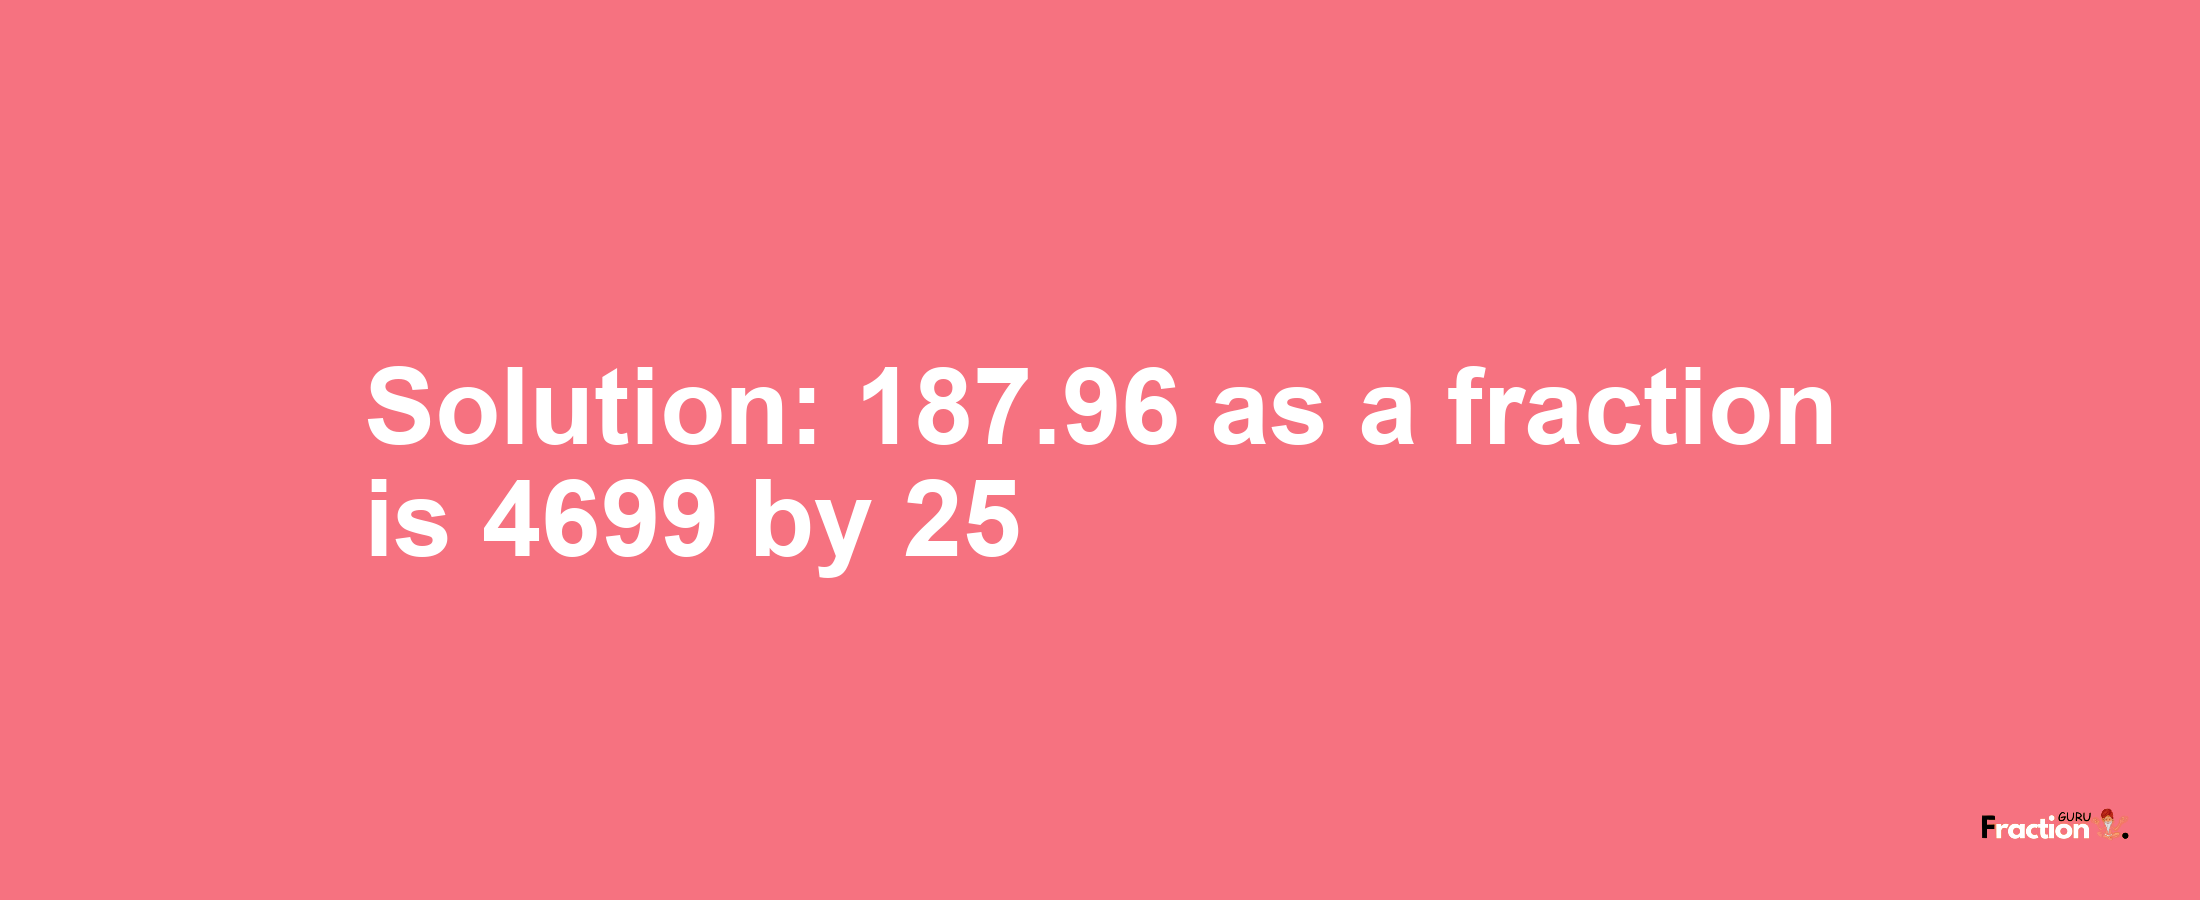 Solution:187.96 as a fraction is 4699/25